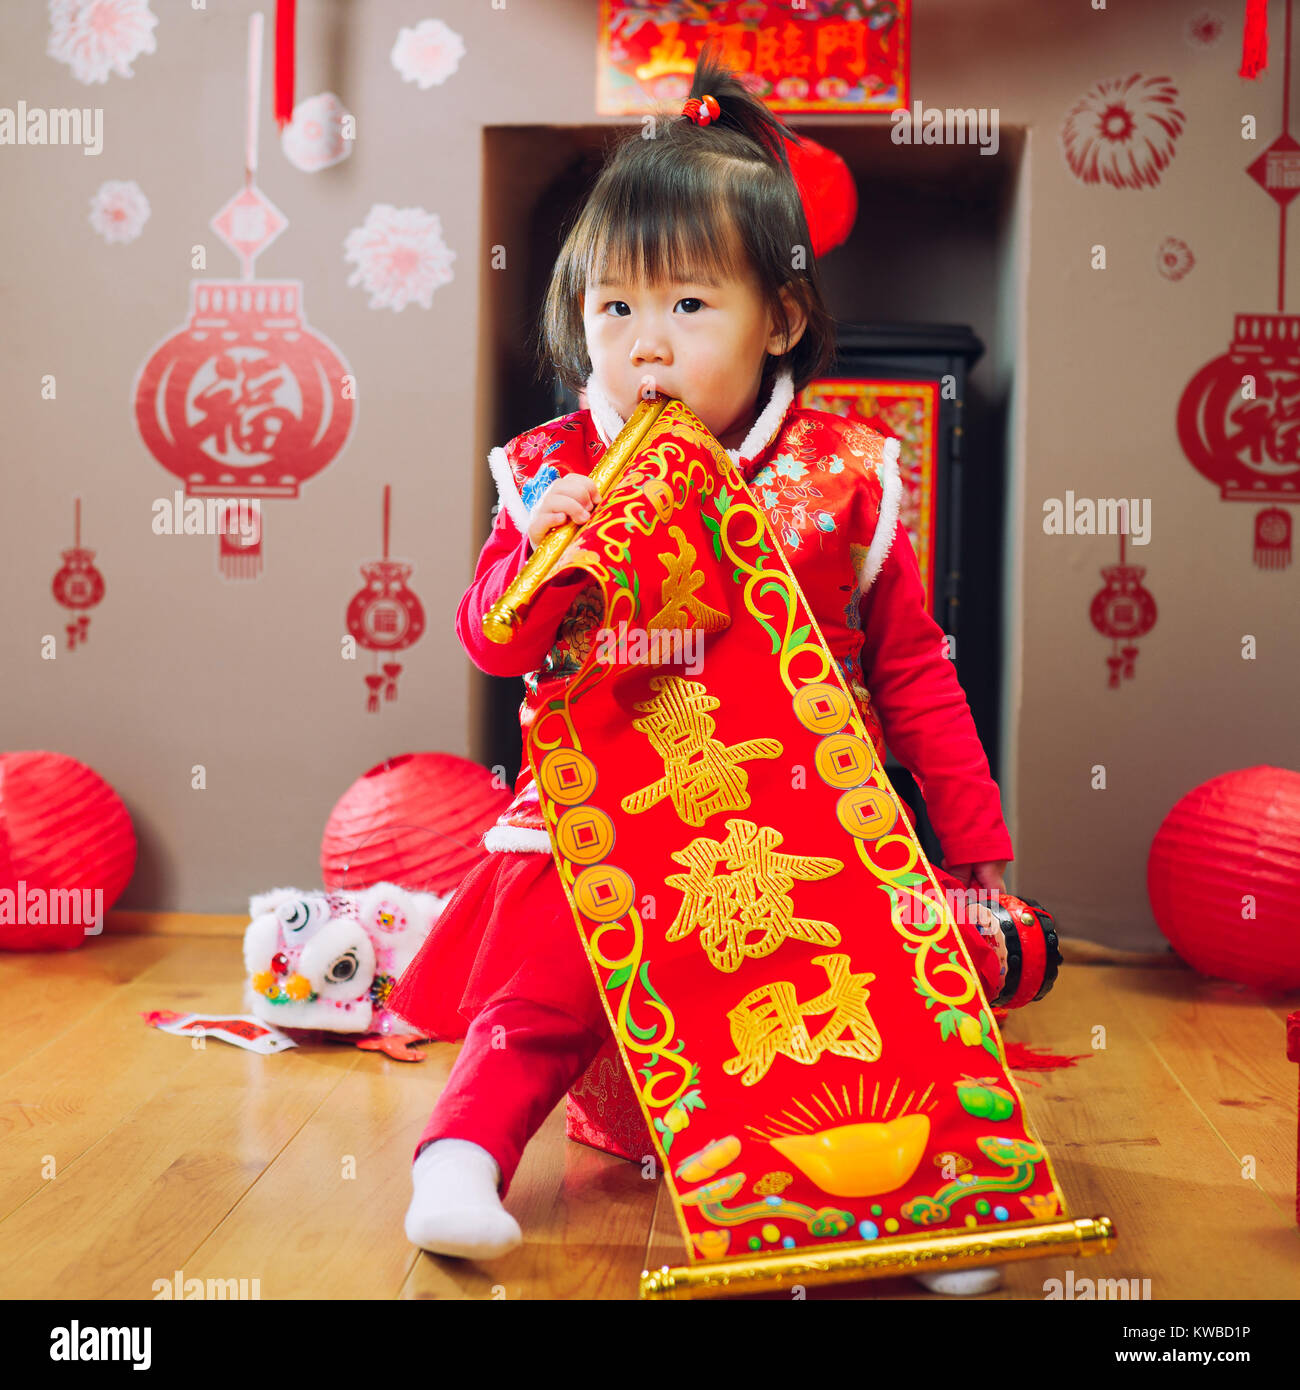 traditional chinese baby girl